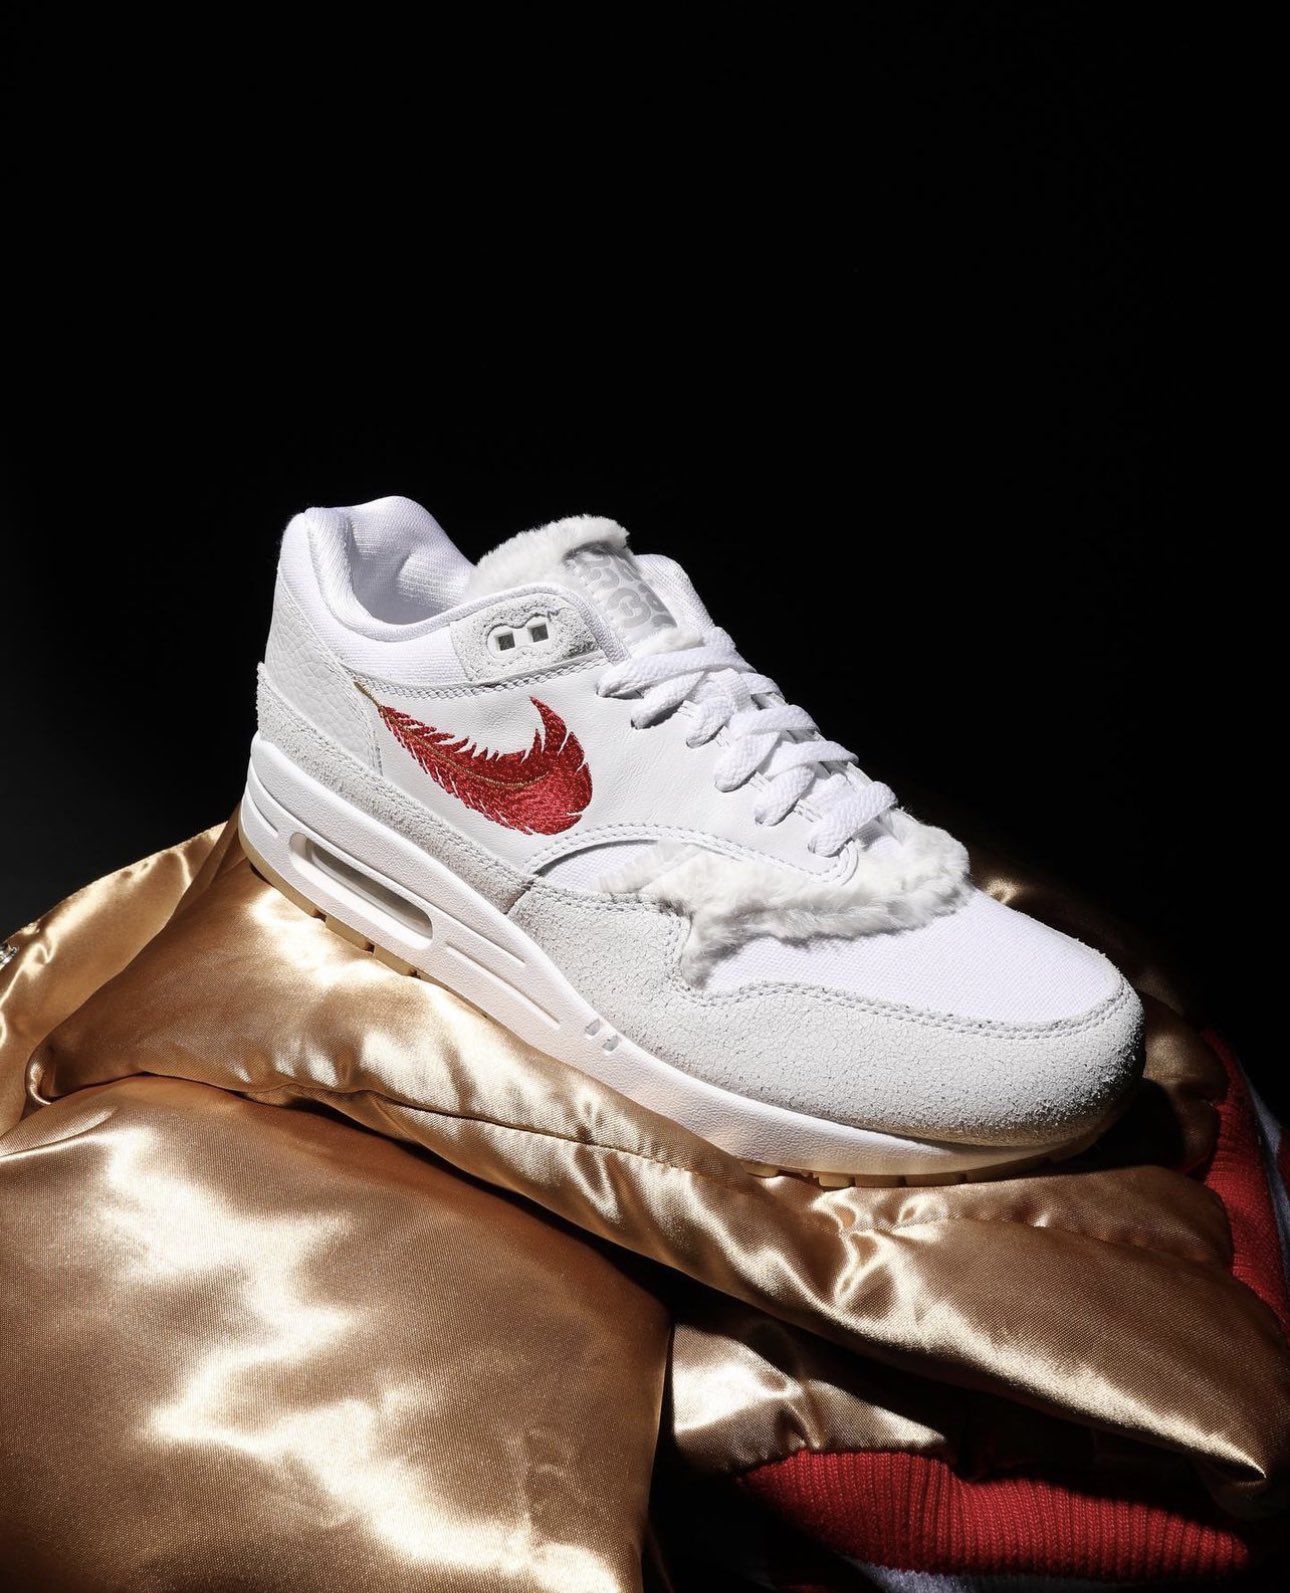 This Is the Supreme x Louis Vuitton x Nike Air Max 1 Custom We Need